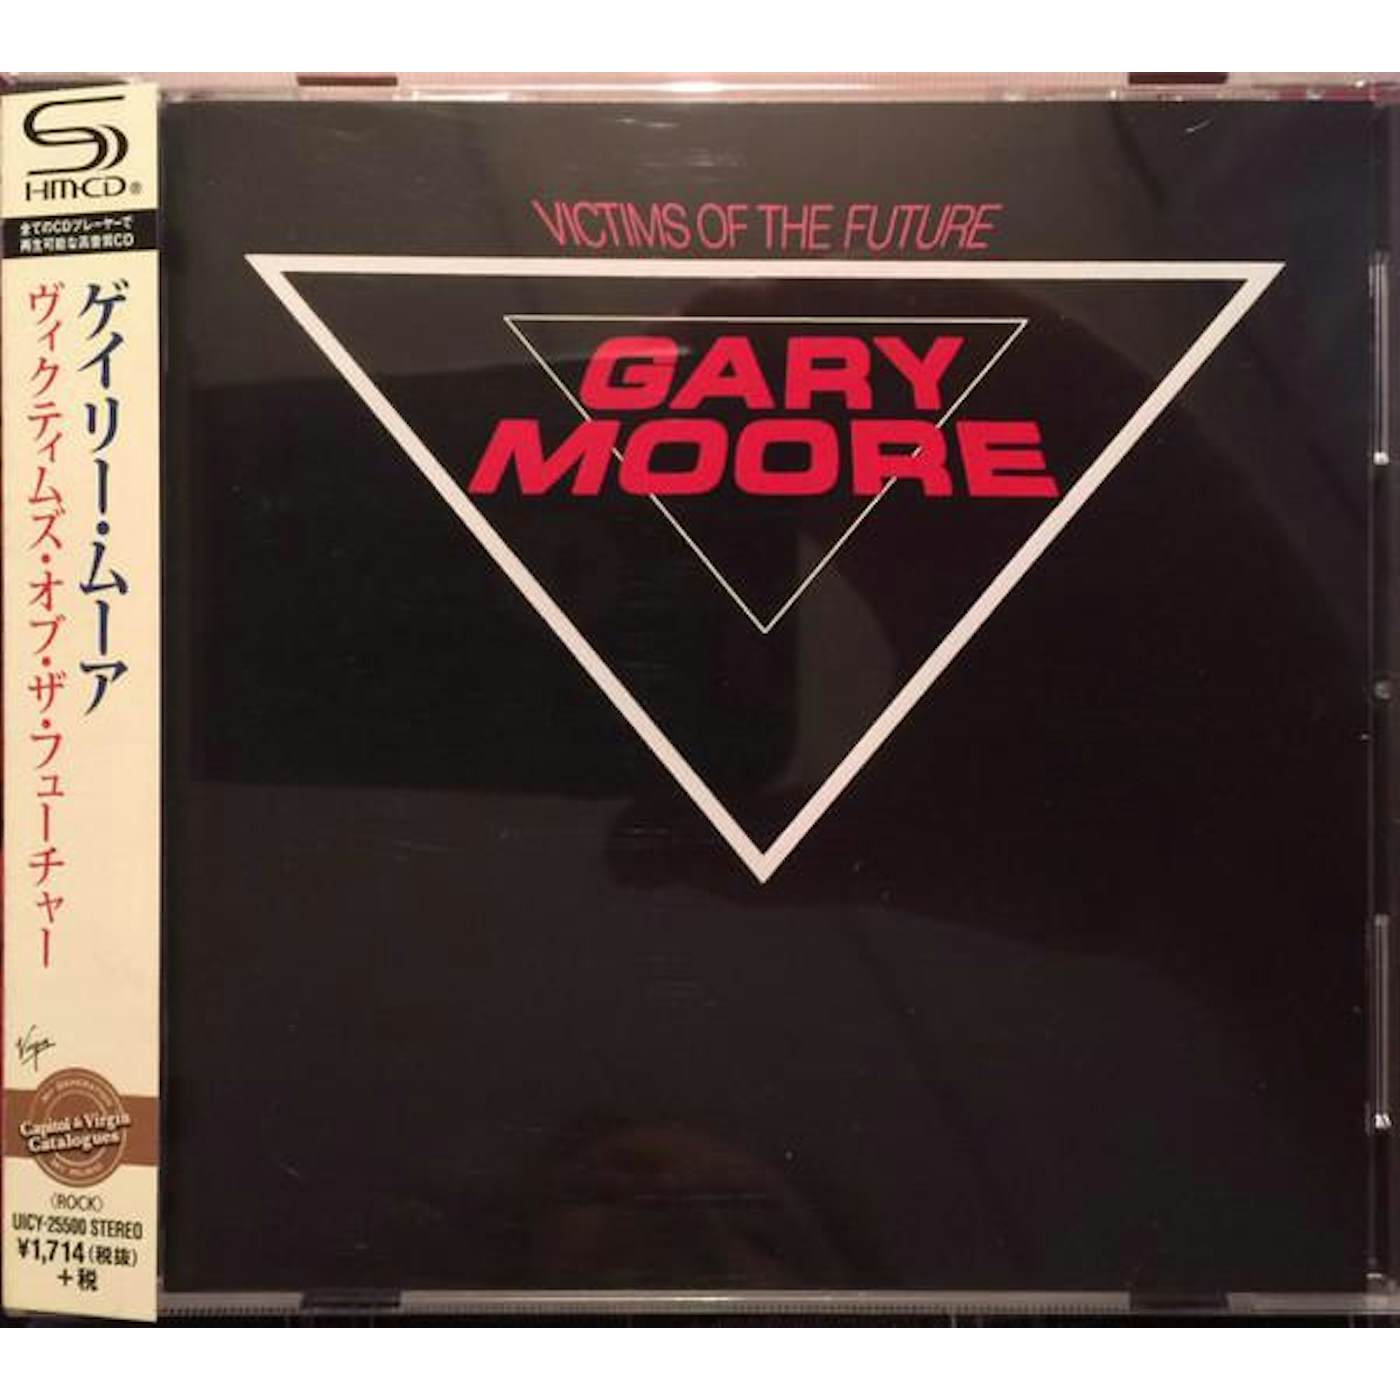 Gary Moore VICTIMS OF THE FUTURE CD